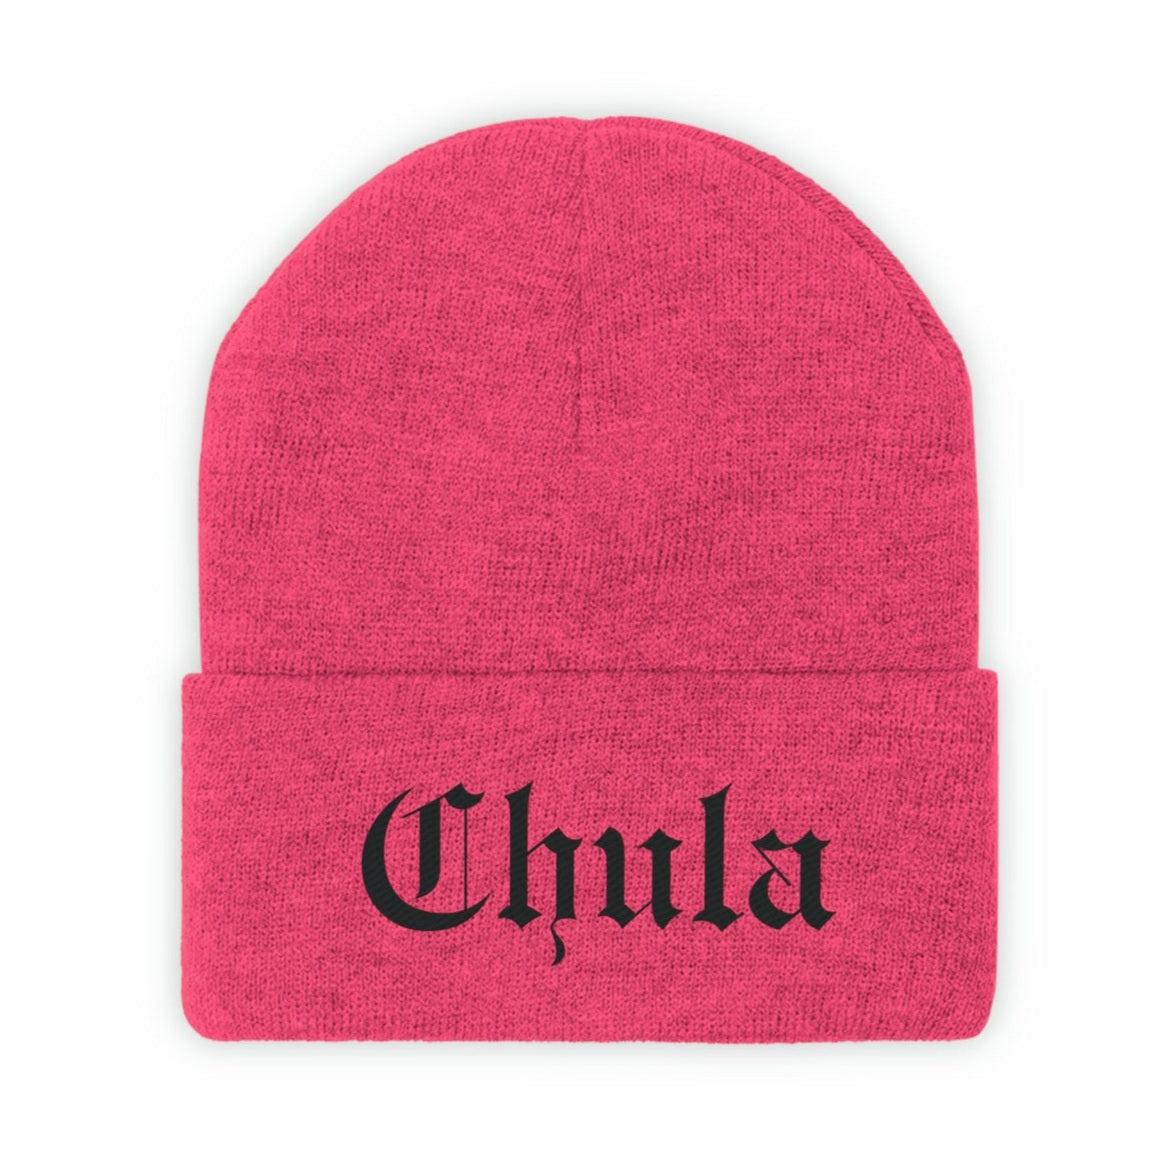 Neon pink knit beanie hat for Latina women and Spanish speakers.  The world "Chula" is embroidered in black old English style writing